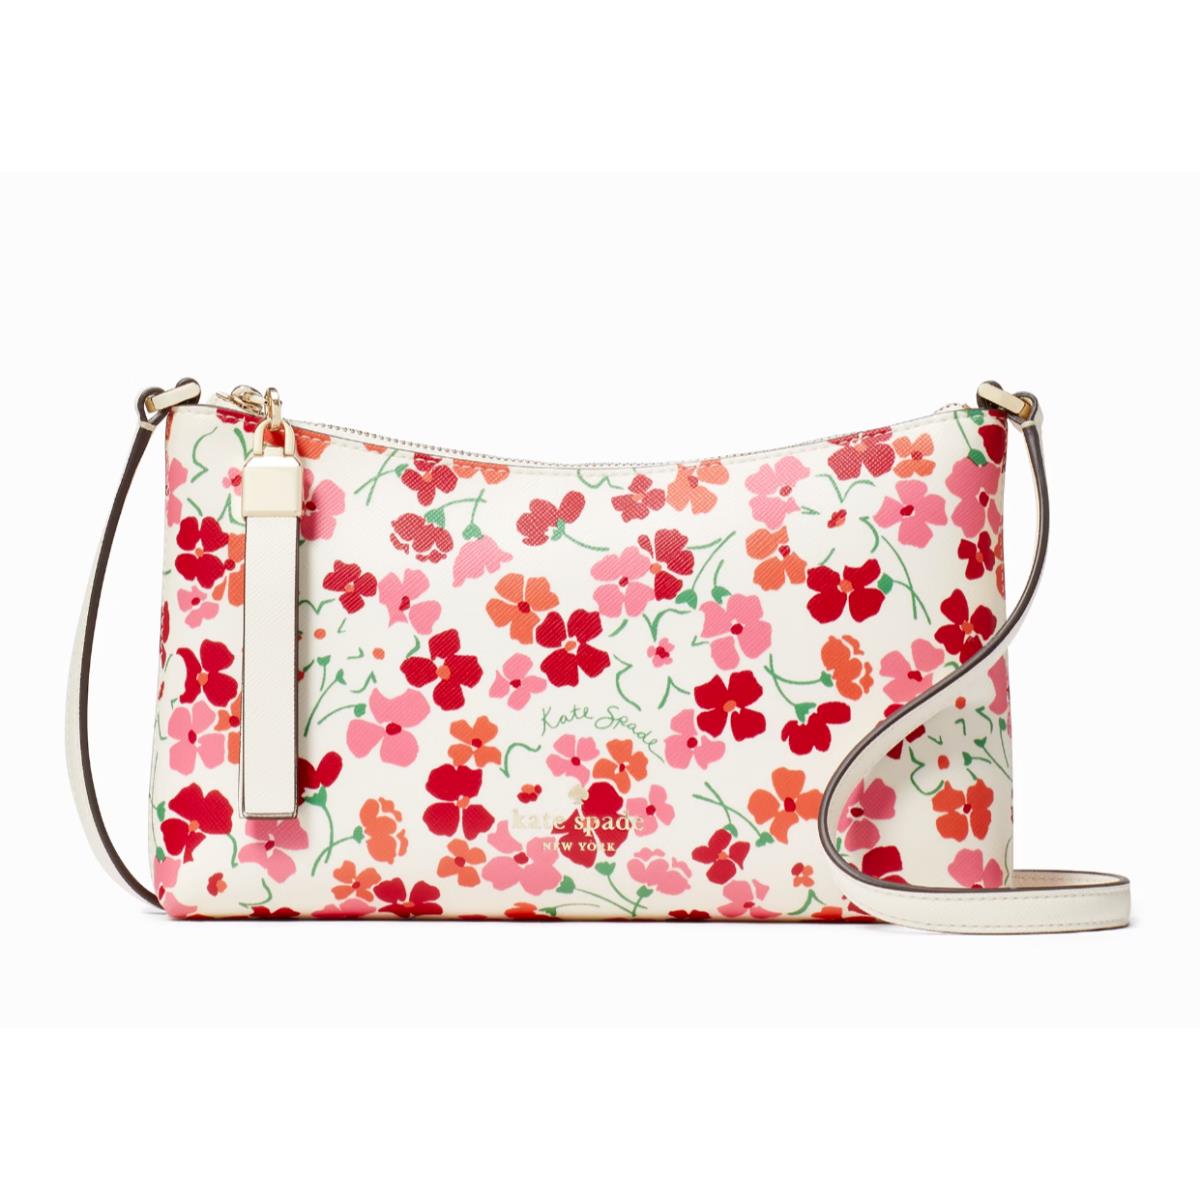 New Kate Spade Sadie Sunny Floral Printed Crossbody Saffiano Pink with Dust Bag